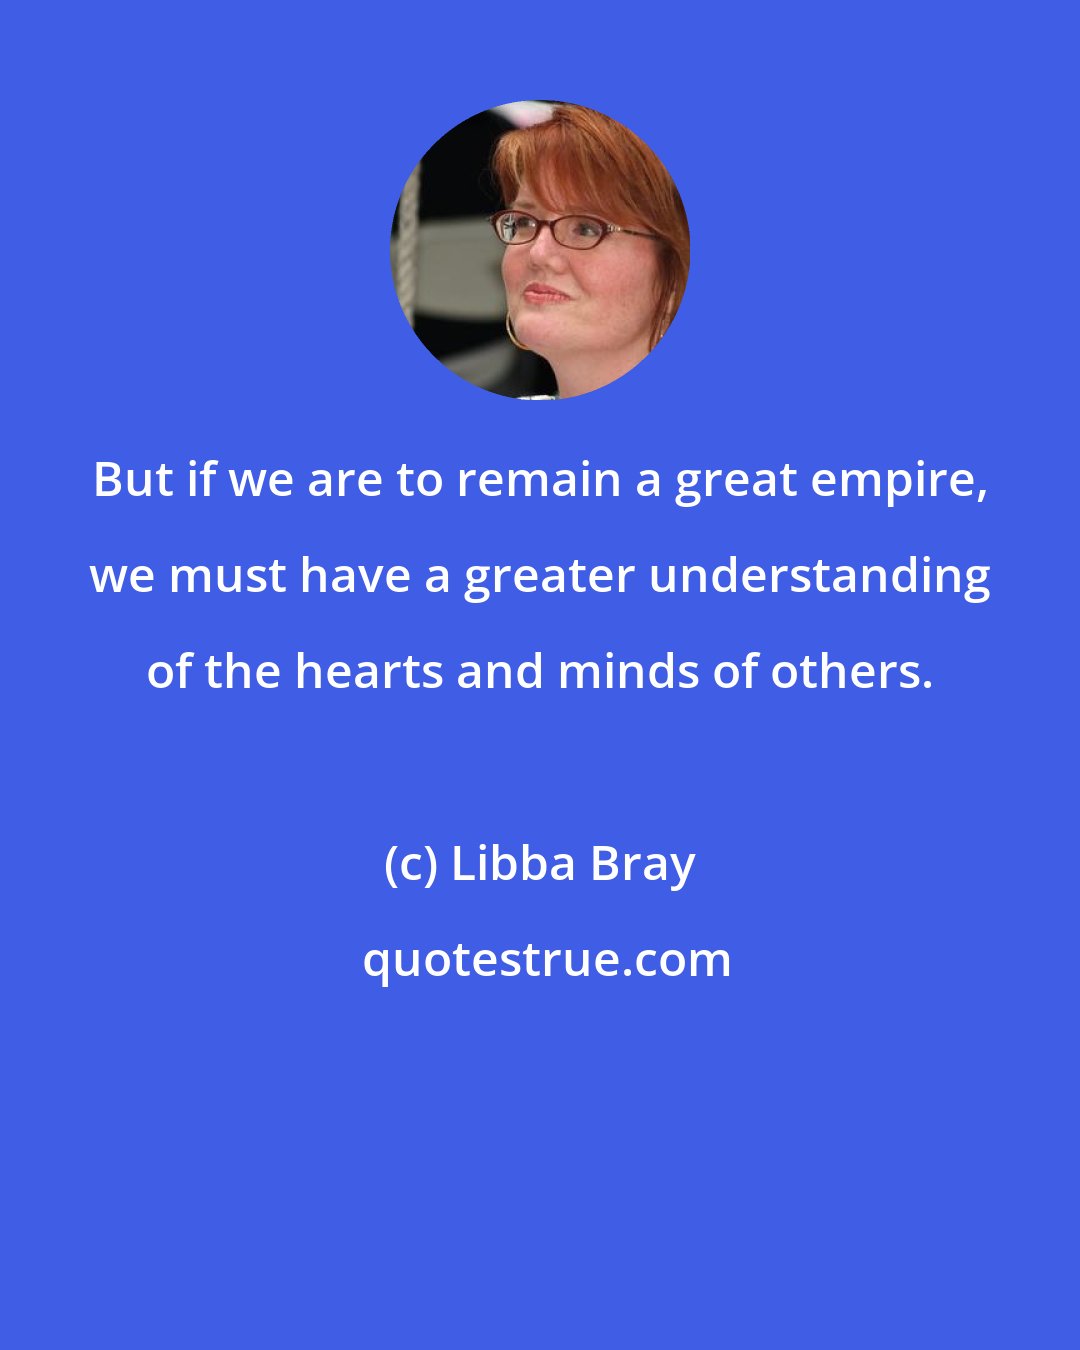 Libba Bray: But if we are to remain a great empire, we must have a greater understanding of the hearts and minds of others.